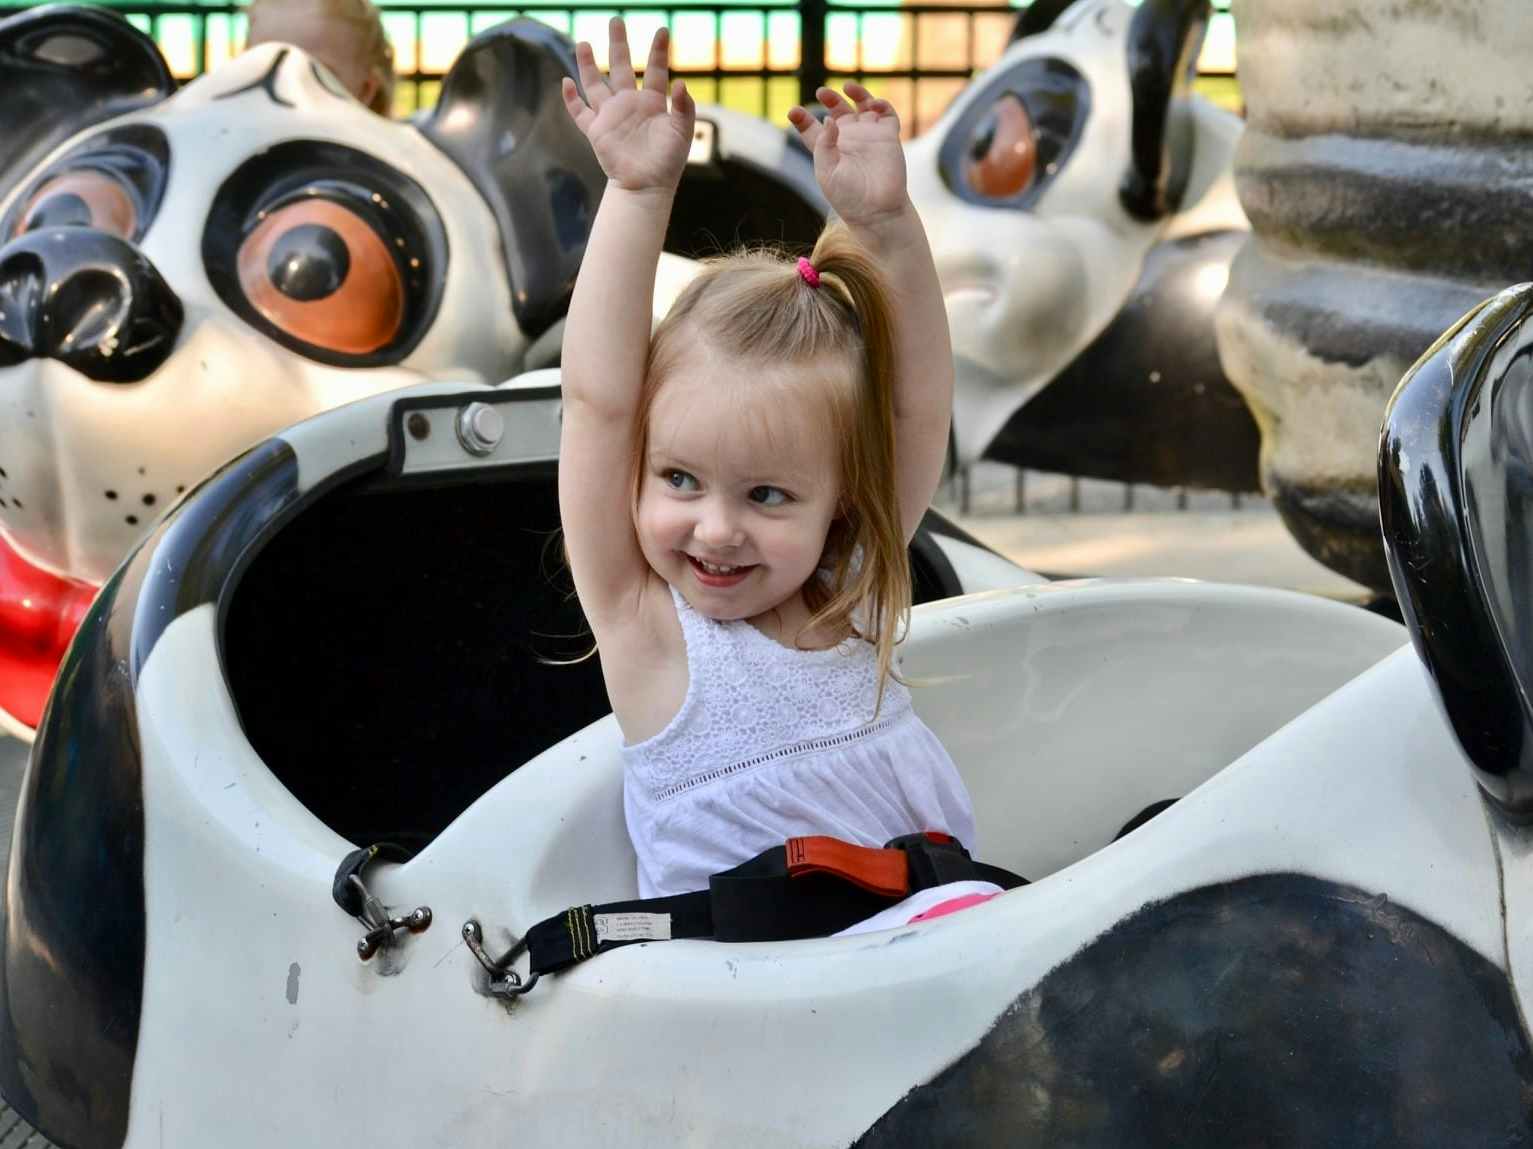 A little girl riding a ride at Dutch Wonderland with her arms up in the air.